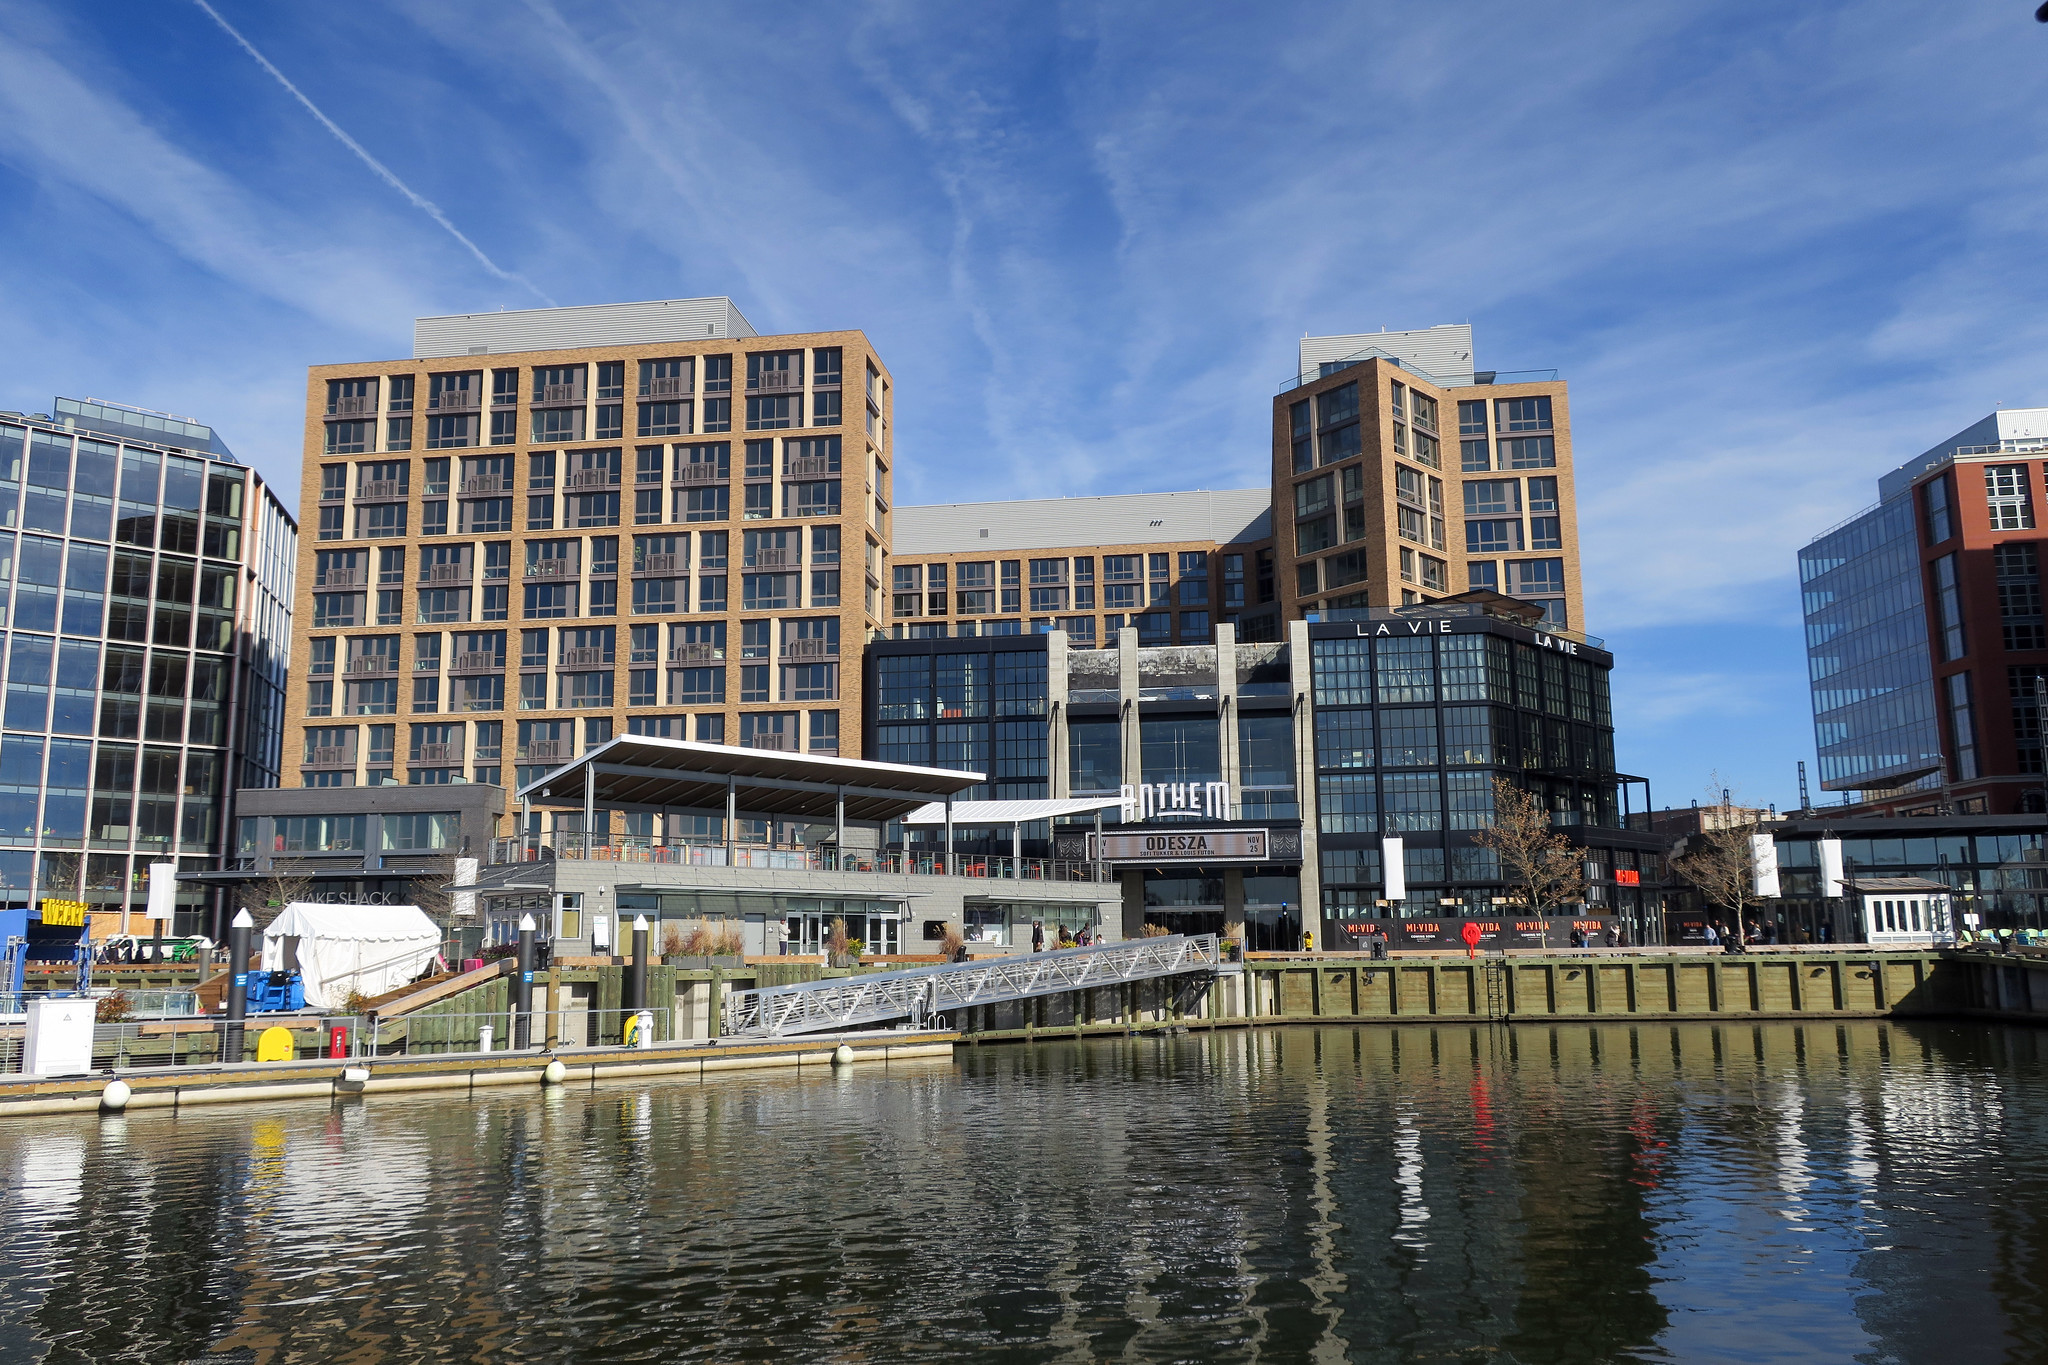 A waterfront development in Washington, DC, the Wharf, featuring mixed-use towers